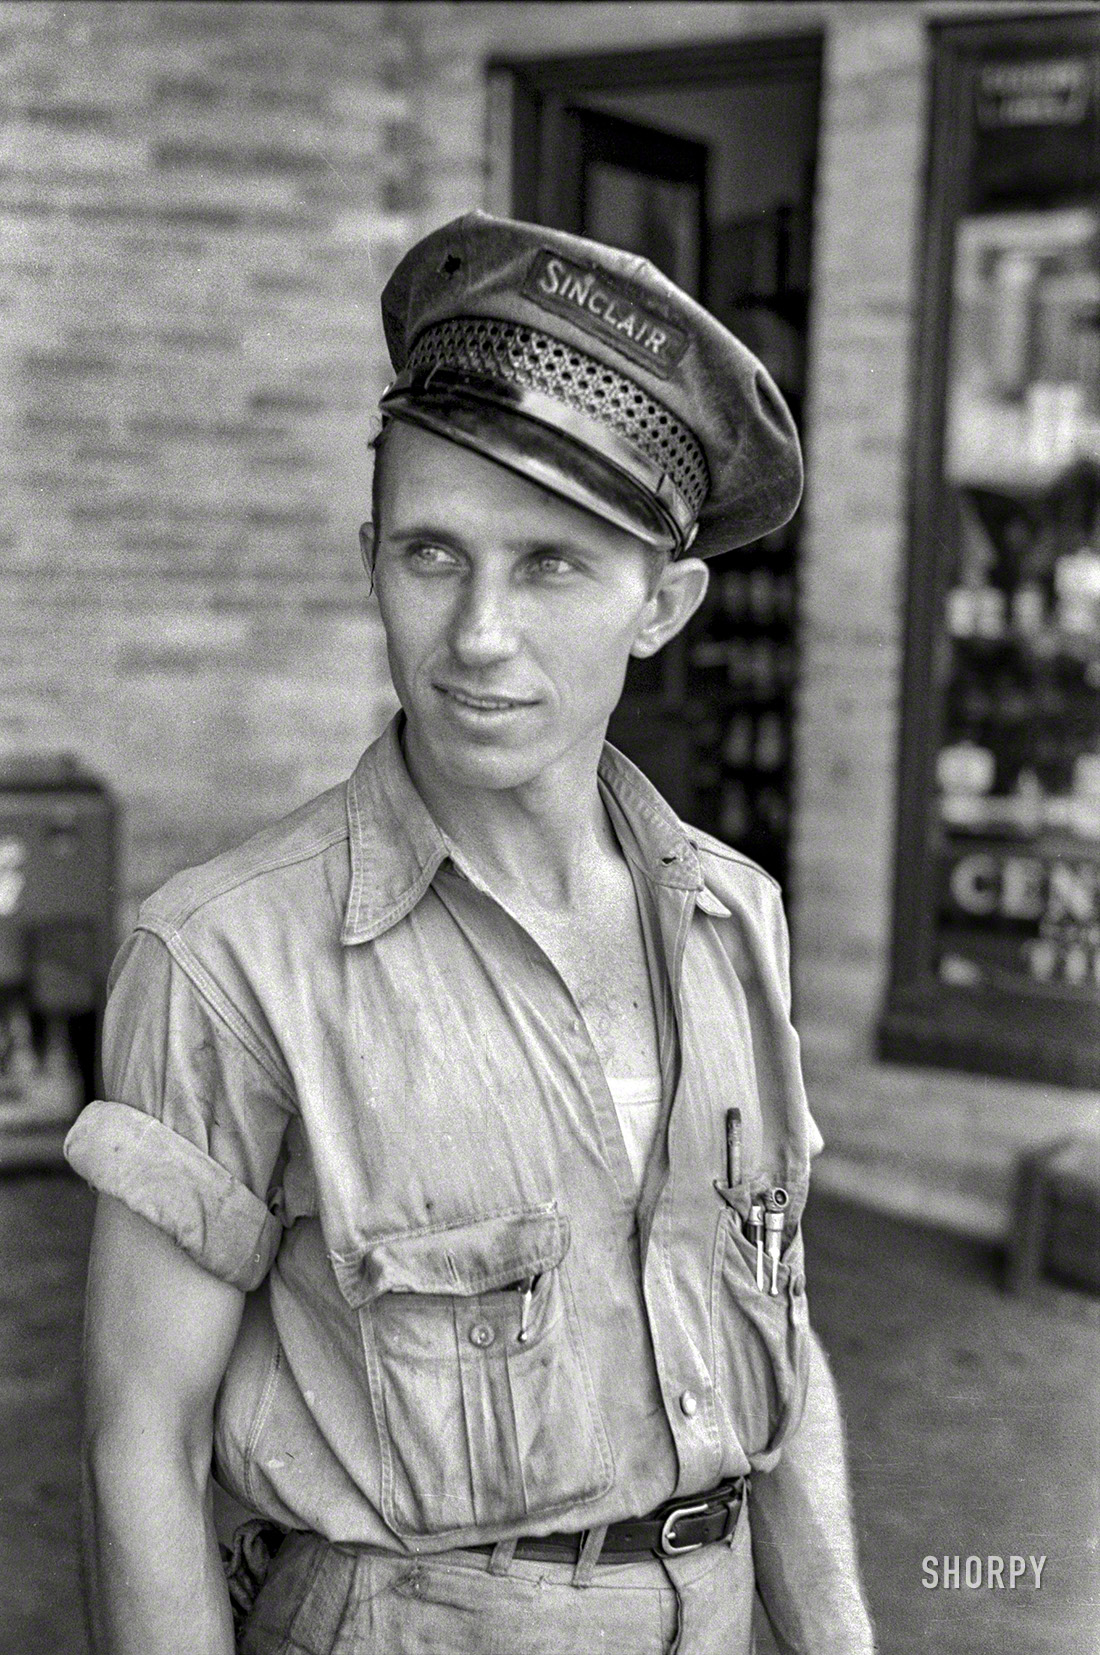 August 1939. "Service station operator in Seminole, Oklahoma." 35mm nitrate negative by Russell Lee for the Farm Security Administration. View full size.